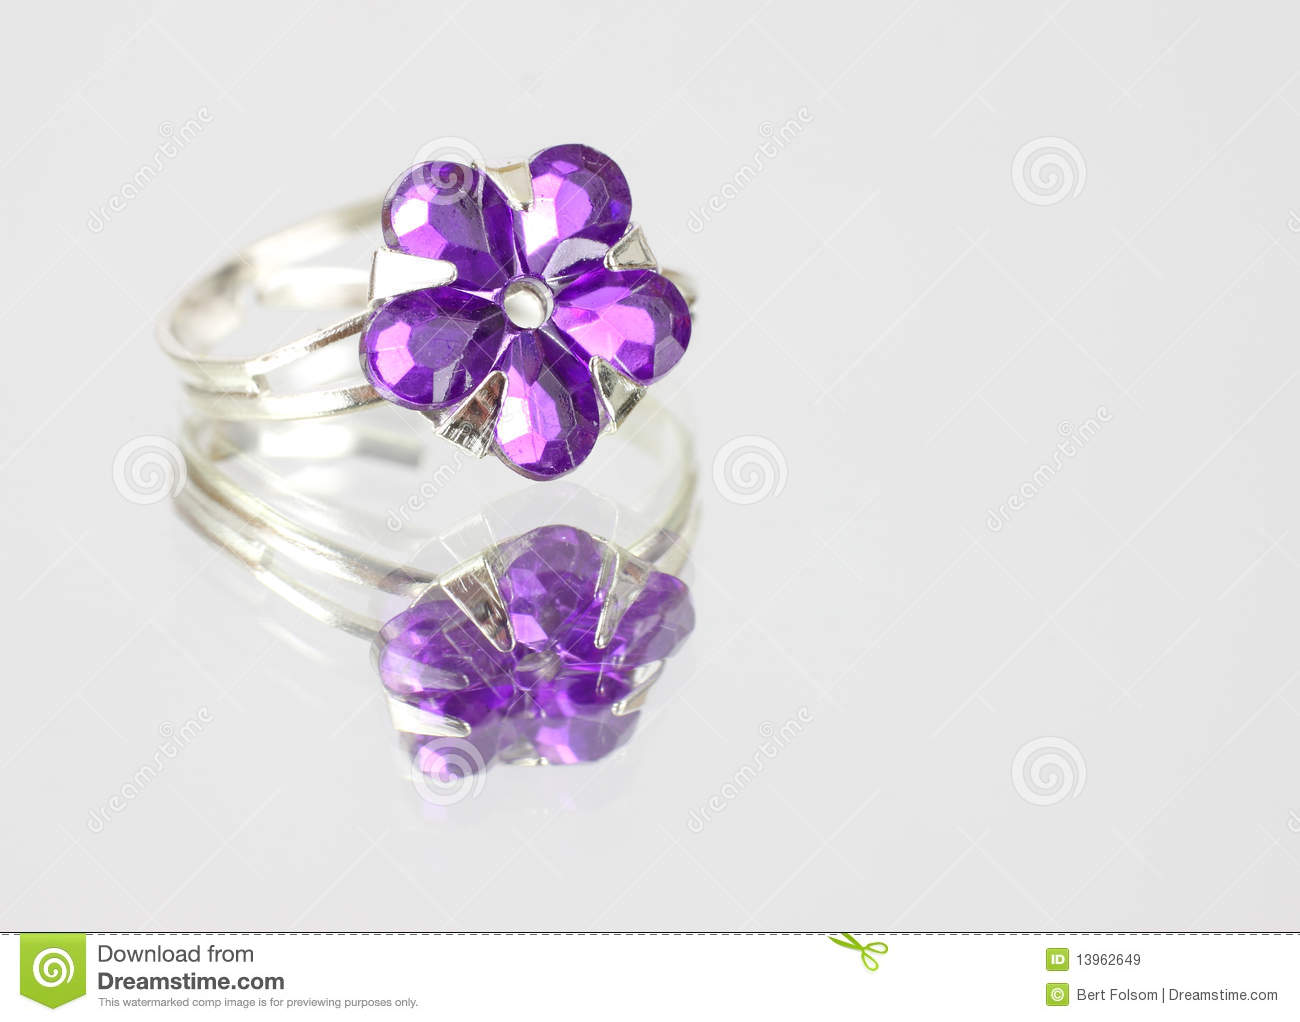 Pretty Purple Costume Jewelry Ring Royalty Free Stock Images   Image    